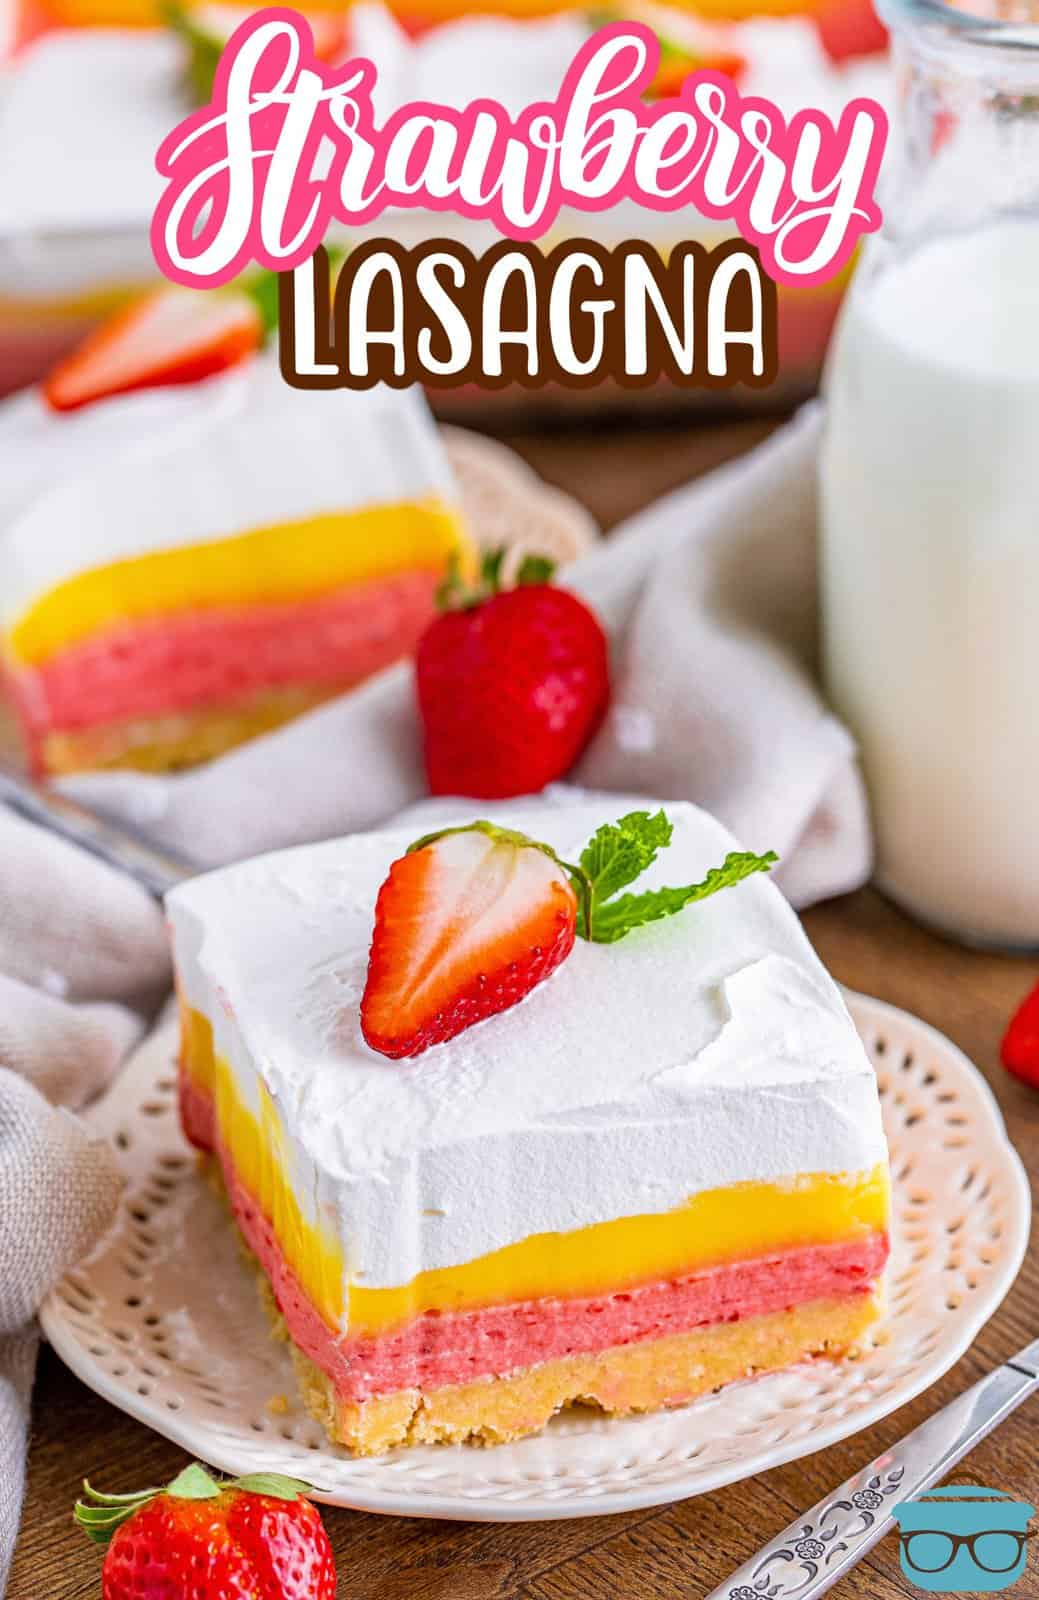 A plate with a slice of Strawberry Lasagna.